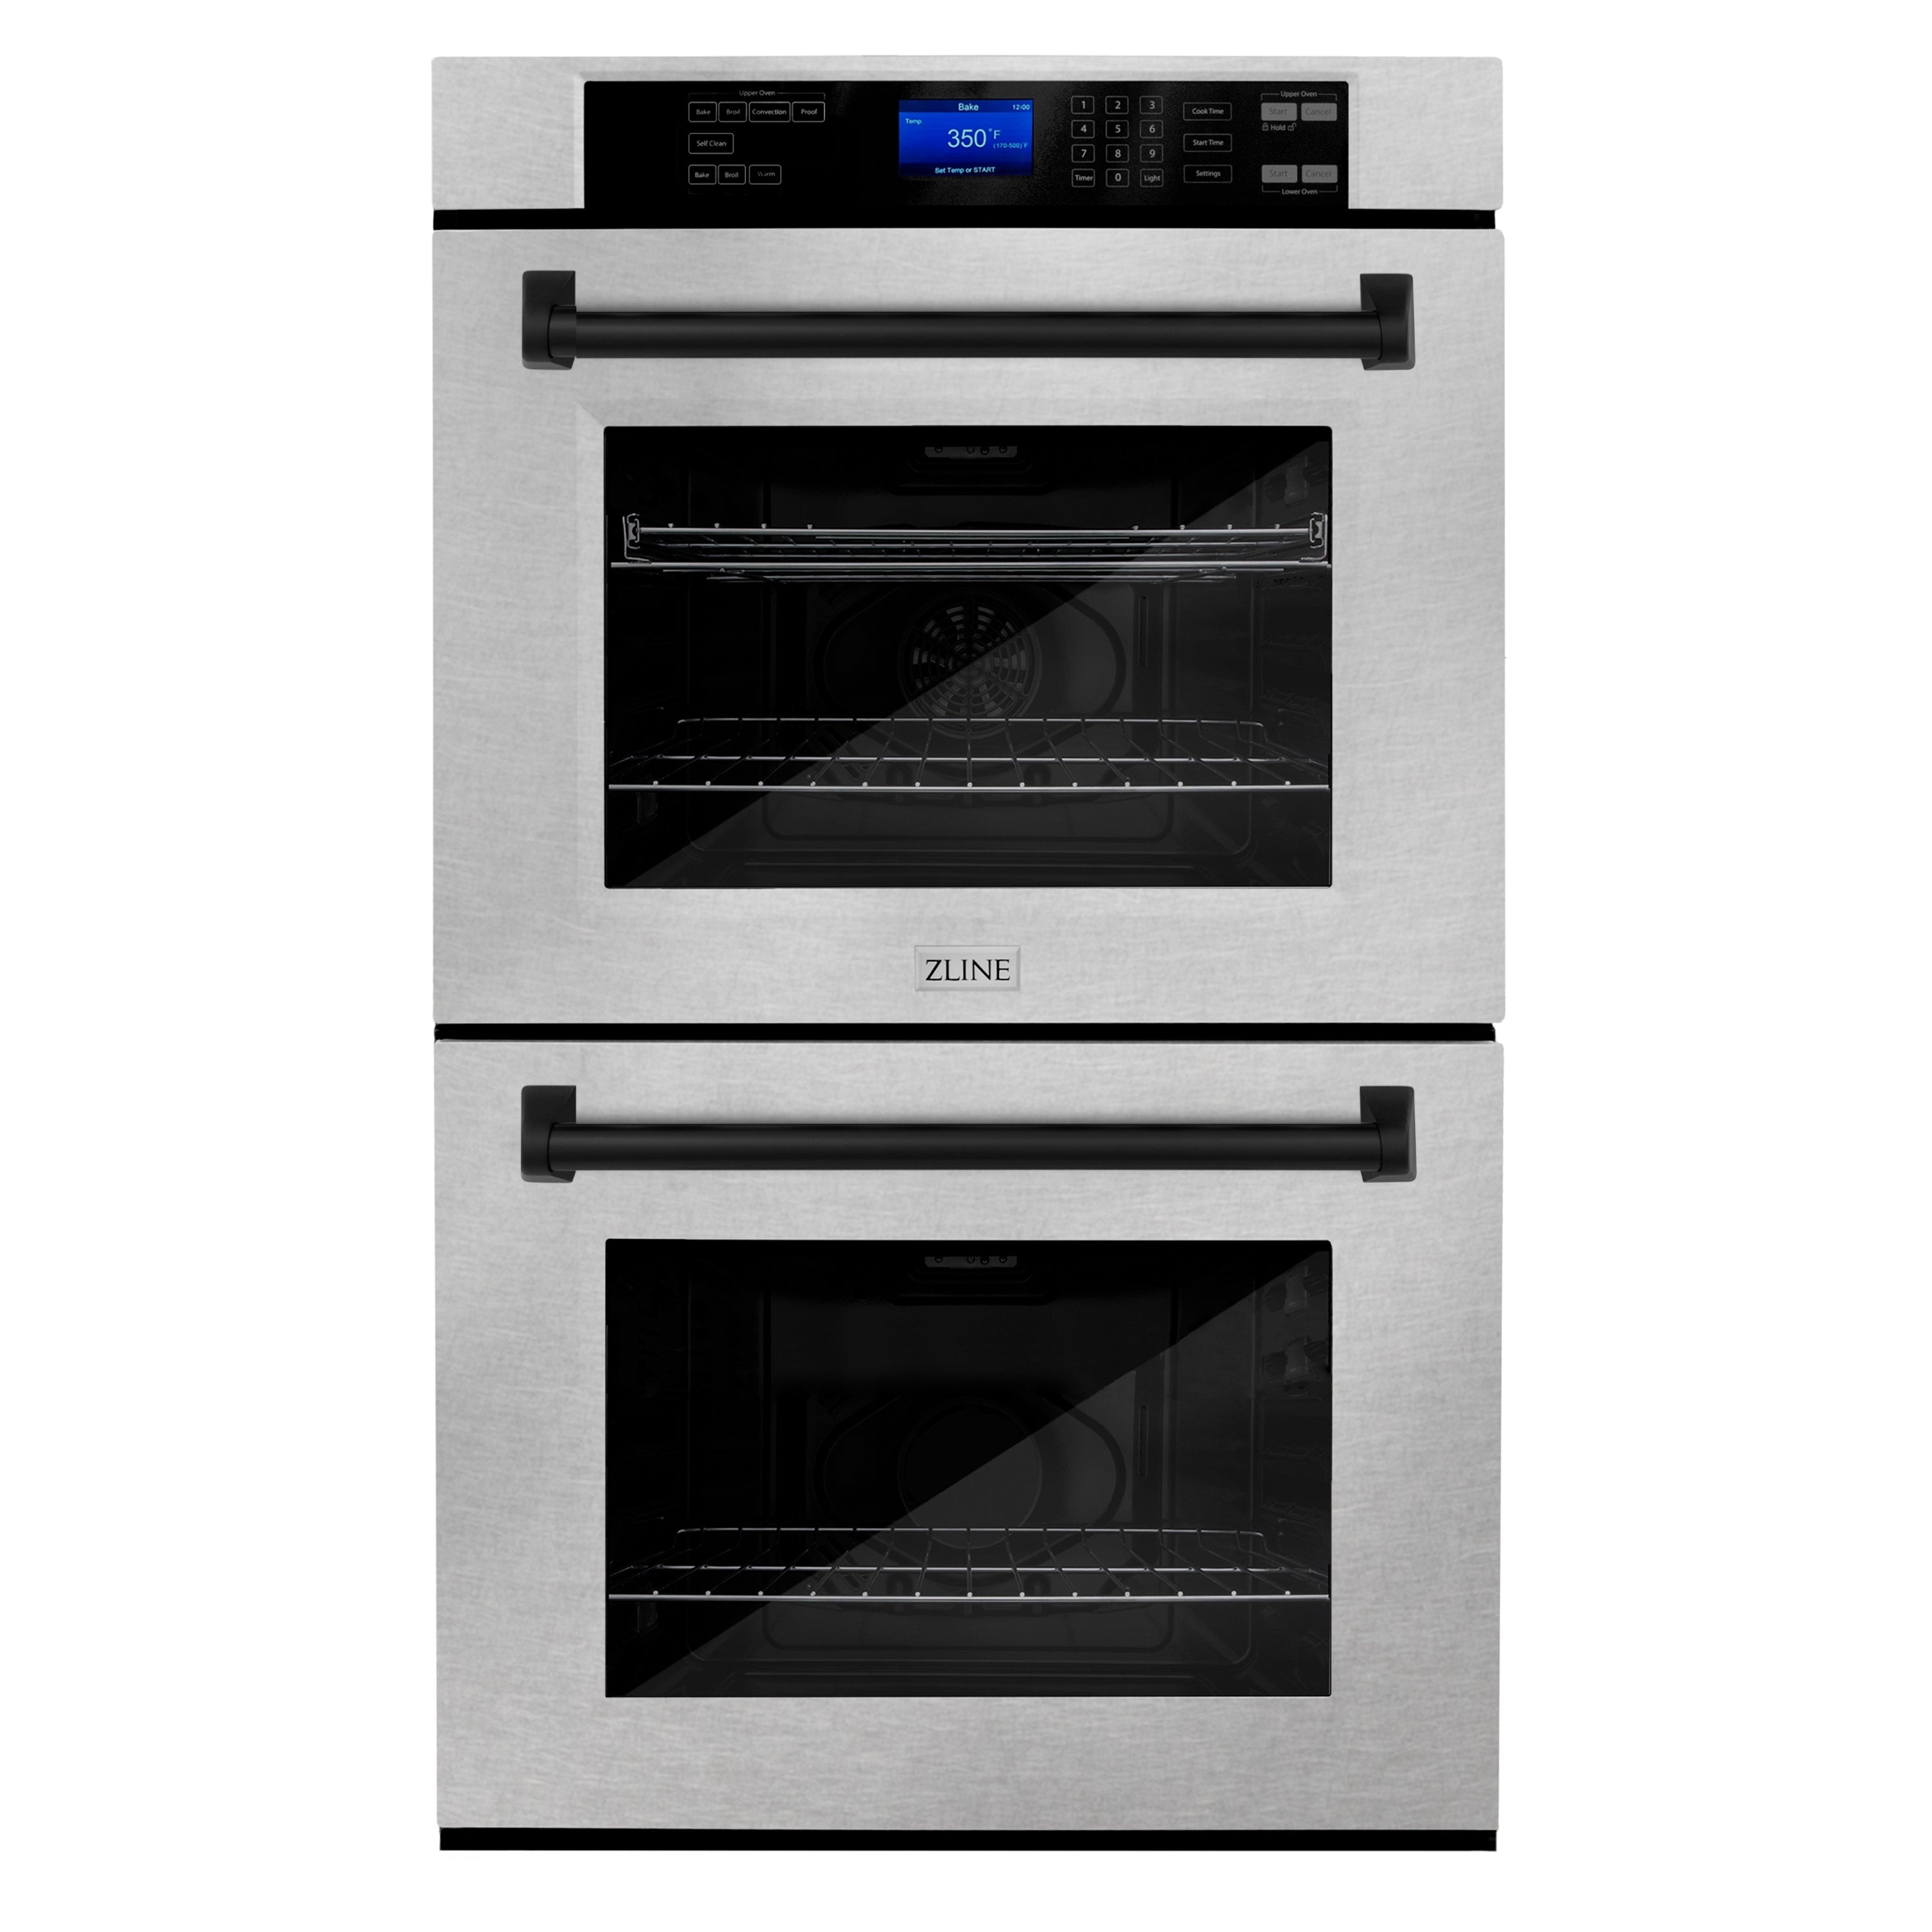 Zline Kitchen and Bath ZLINE 30" Autograph Edition Double Wall Oven with Self Clean and True Convection in Fingerprint Resistant Stainless Steel